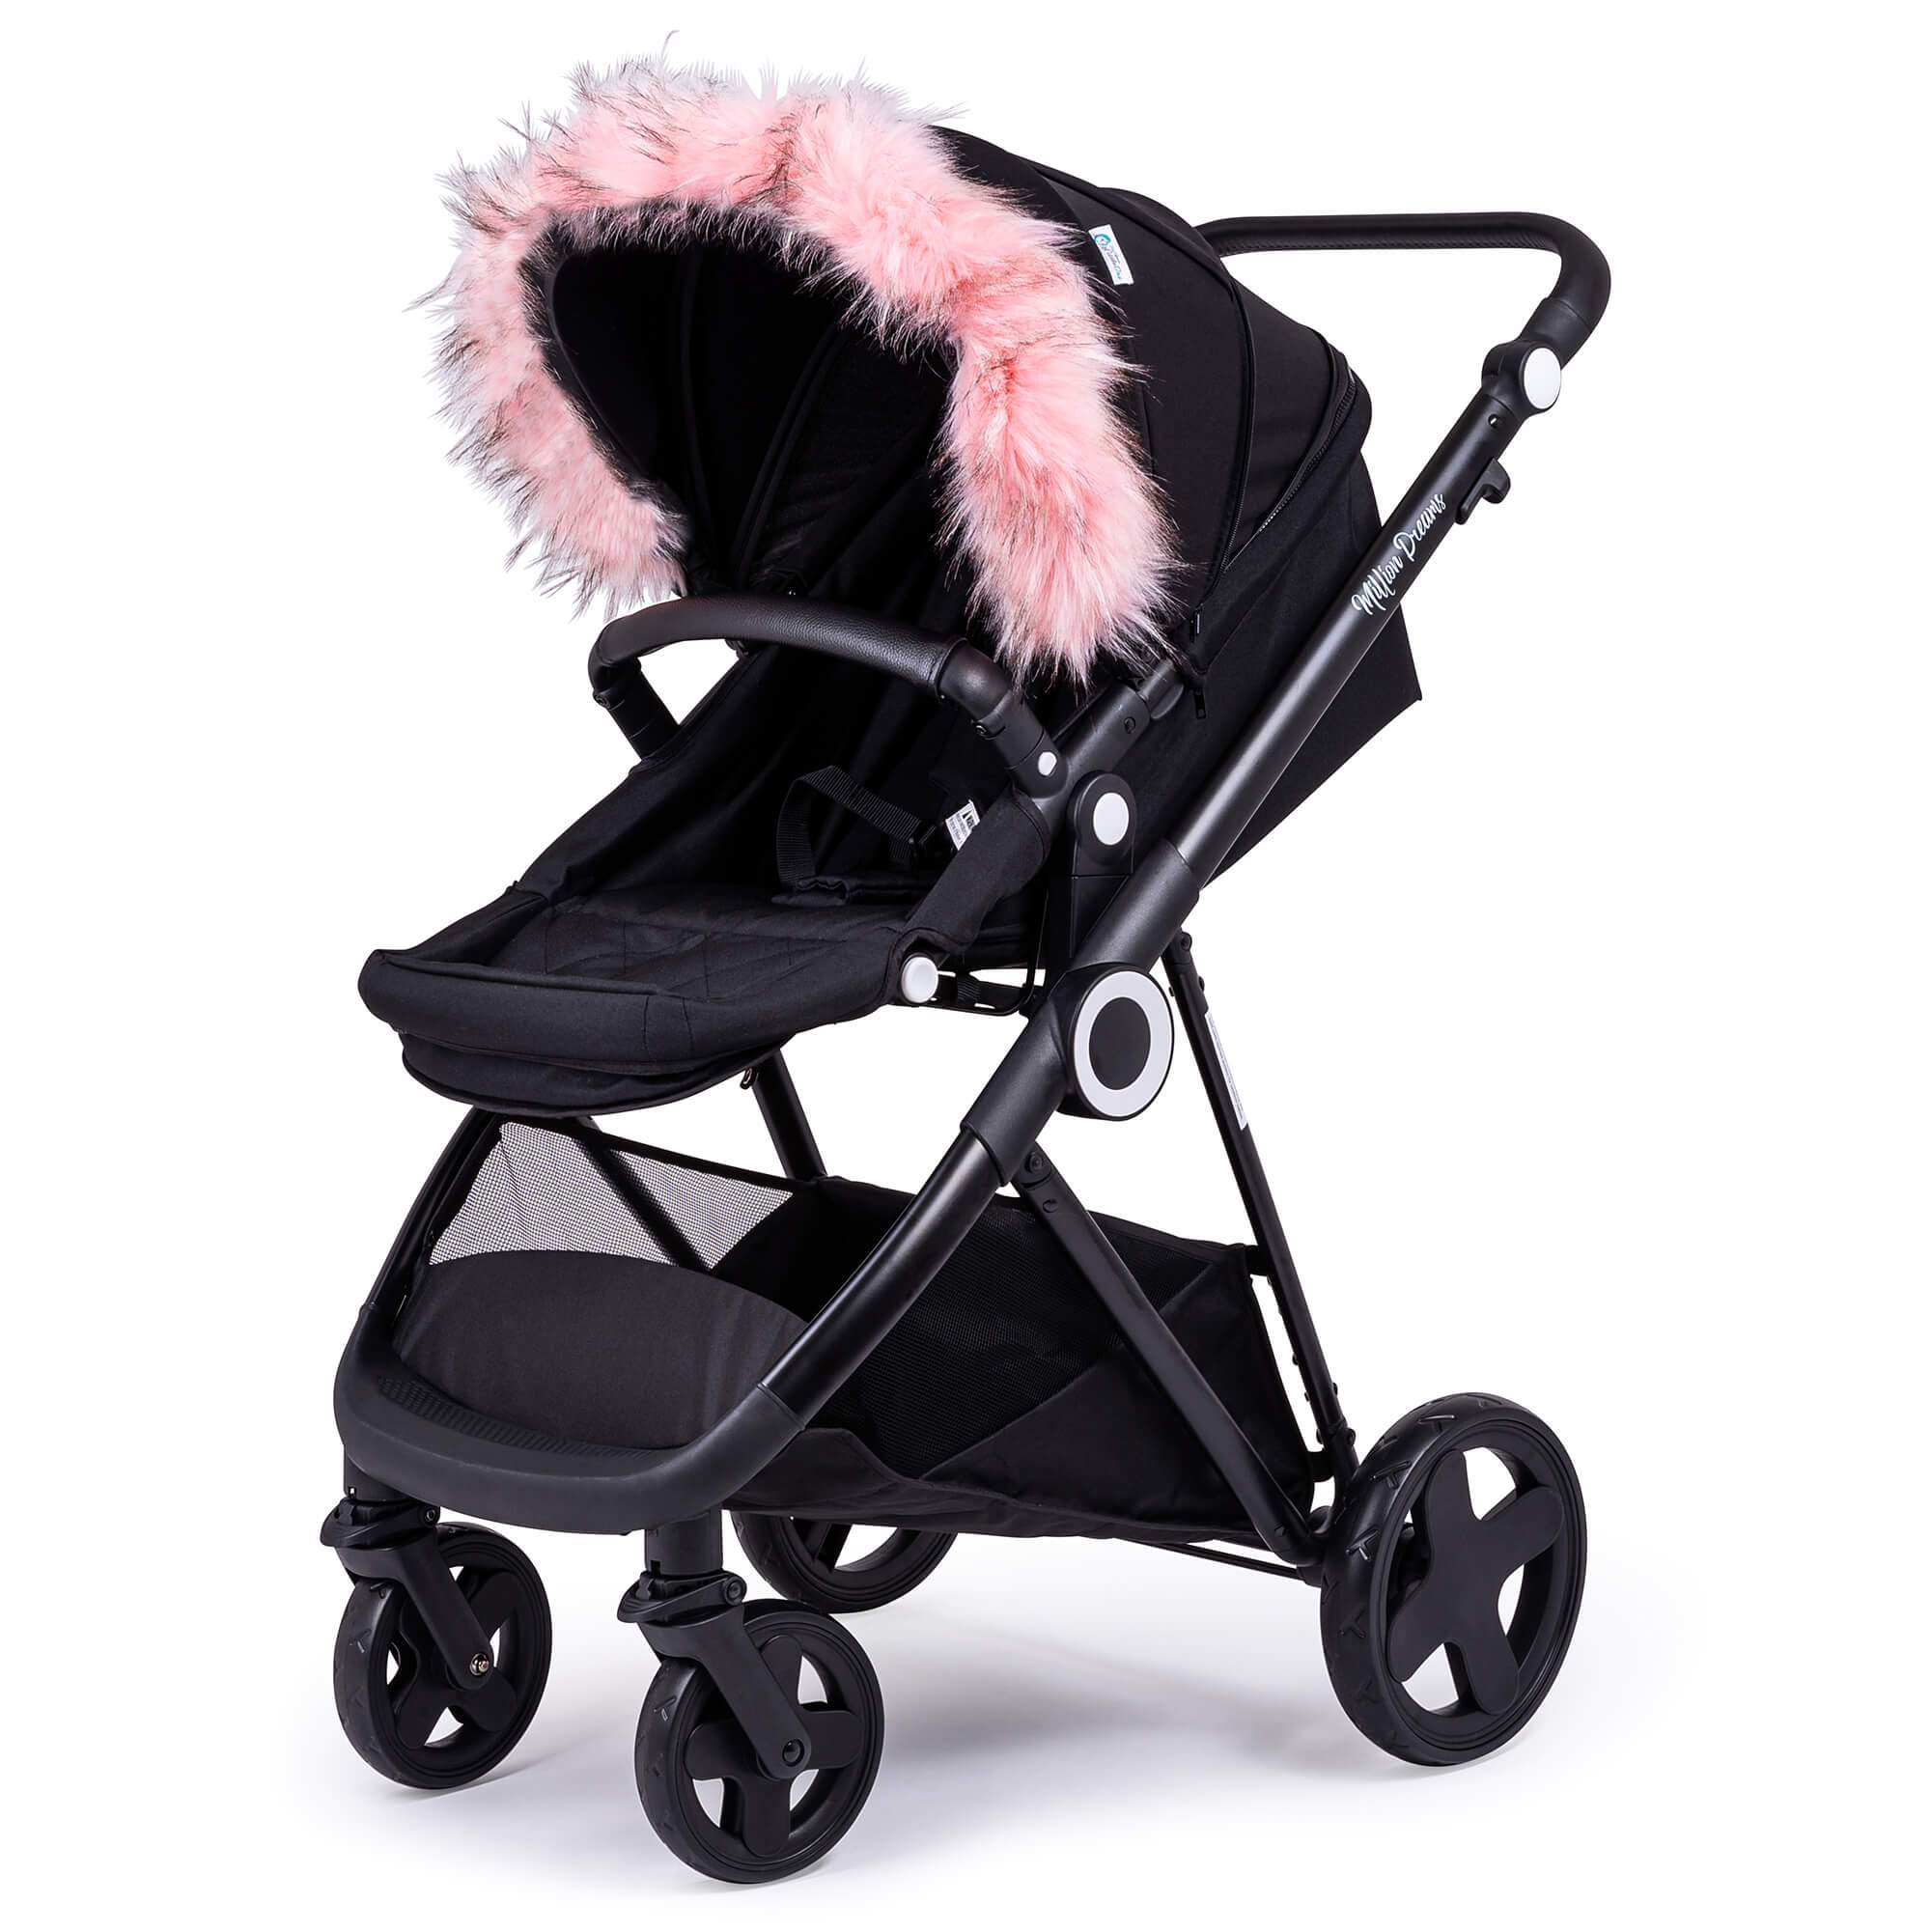 Pram Fur Hood Trim Attachment for Pushchair Compatible with Brevi - Light Pink / Fits All Models | For Your Little One